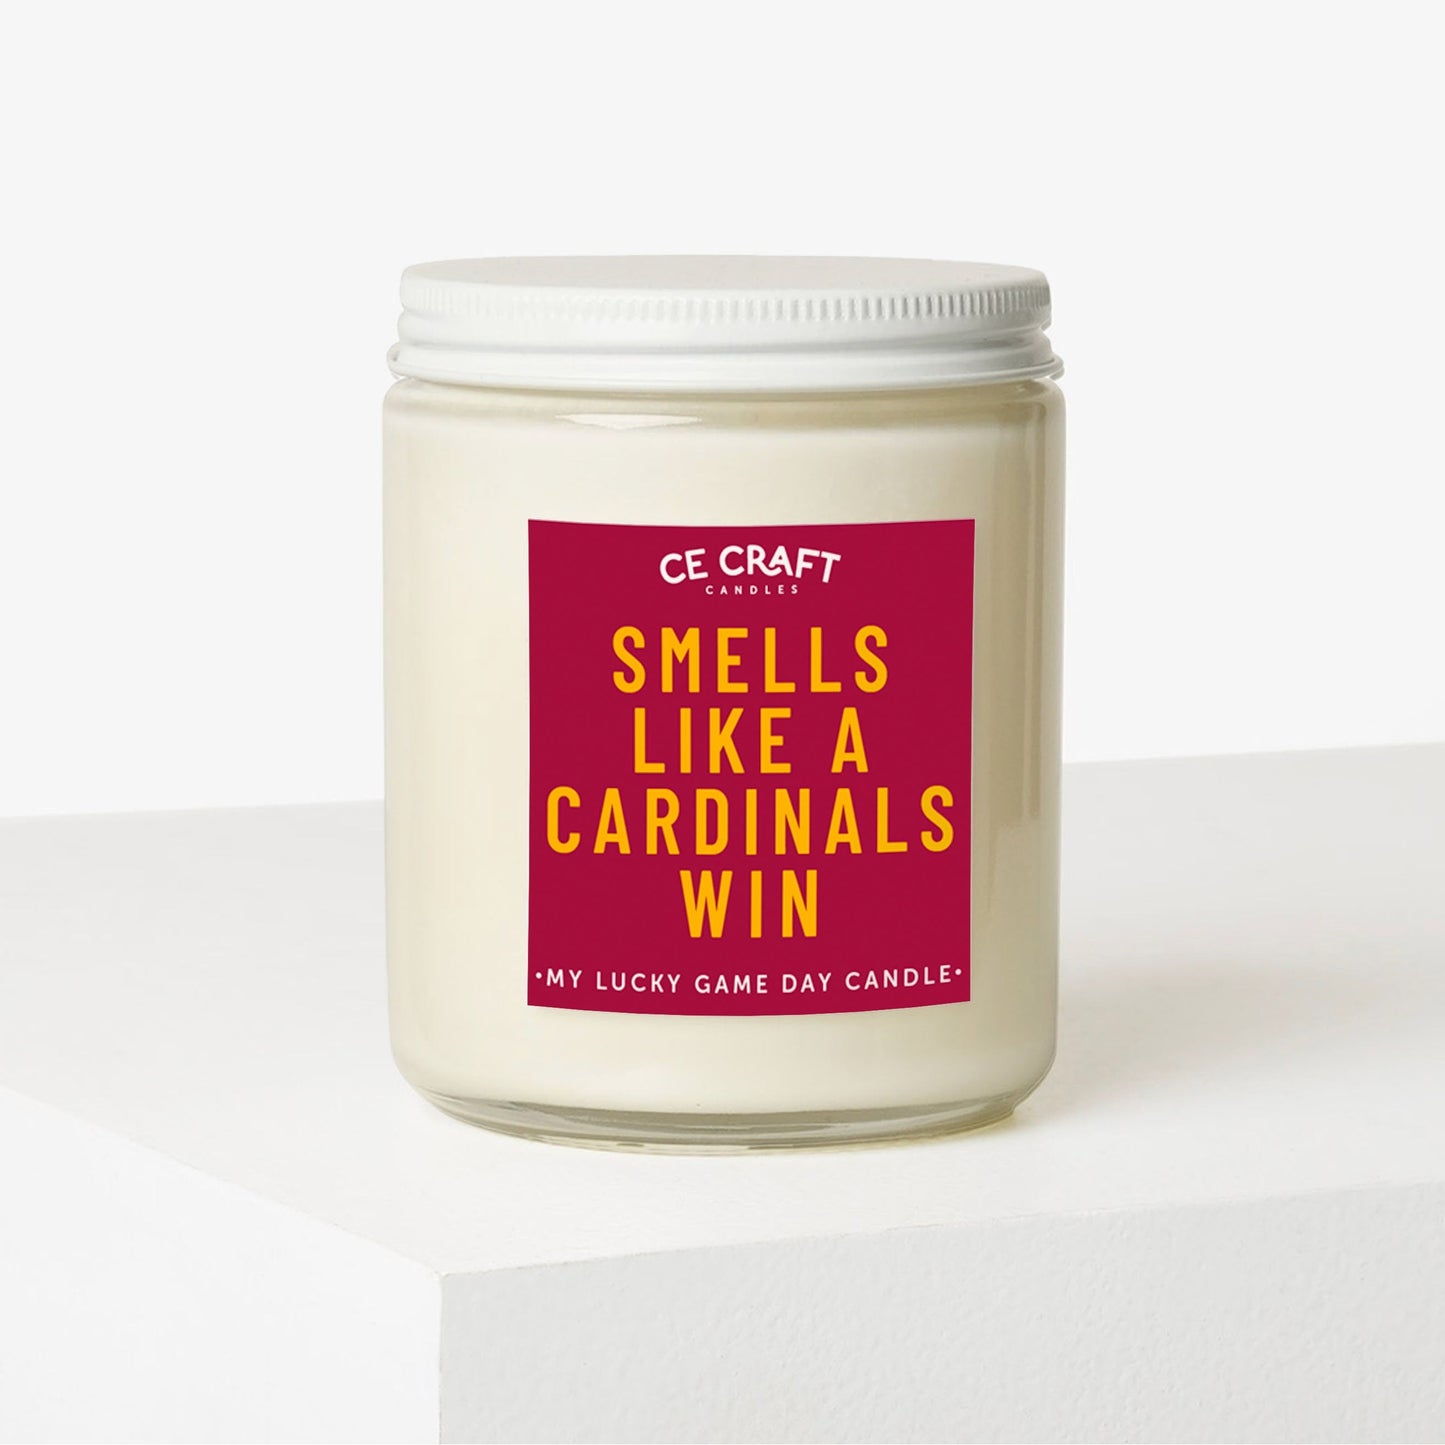 Smells Like a Cardinals Win Scented Candle C & E Craft Co 